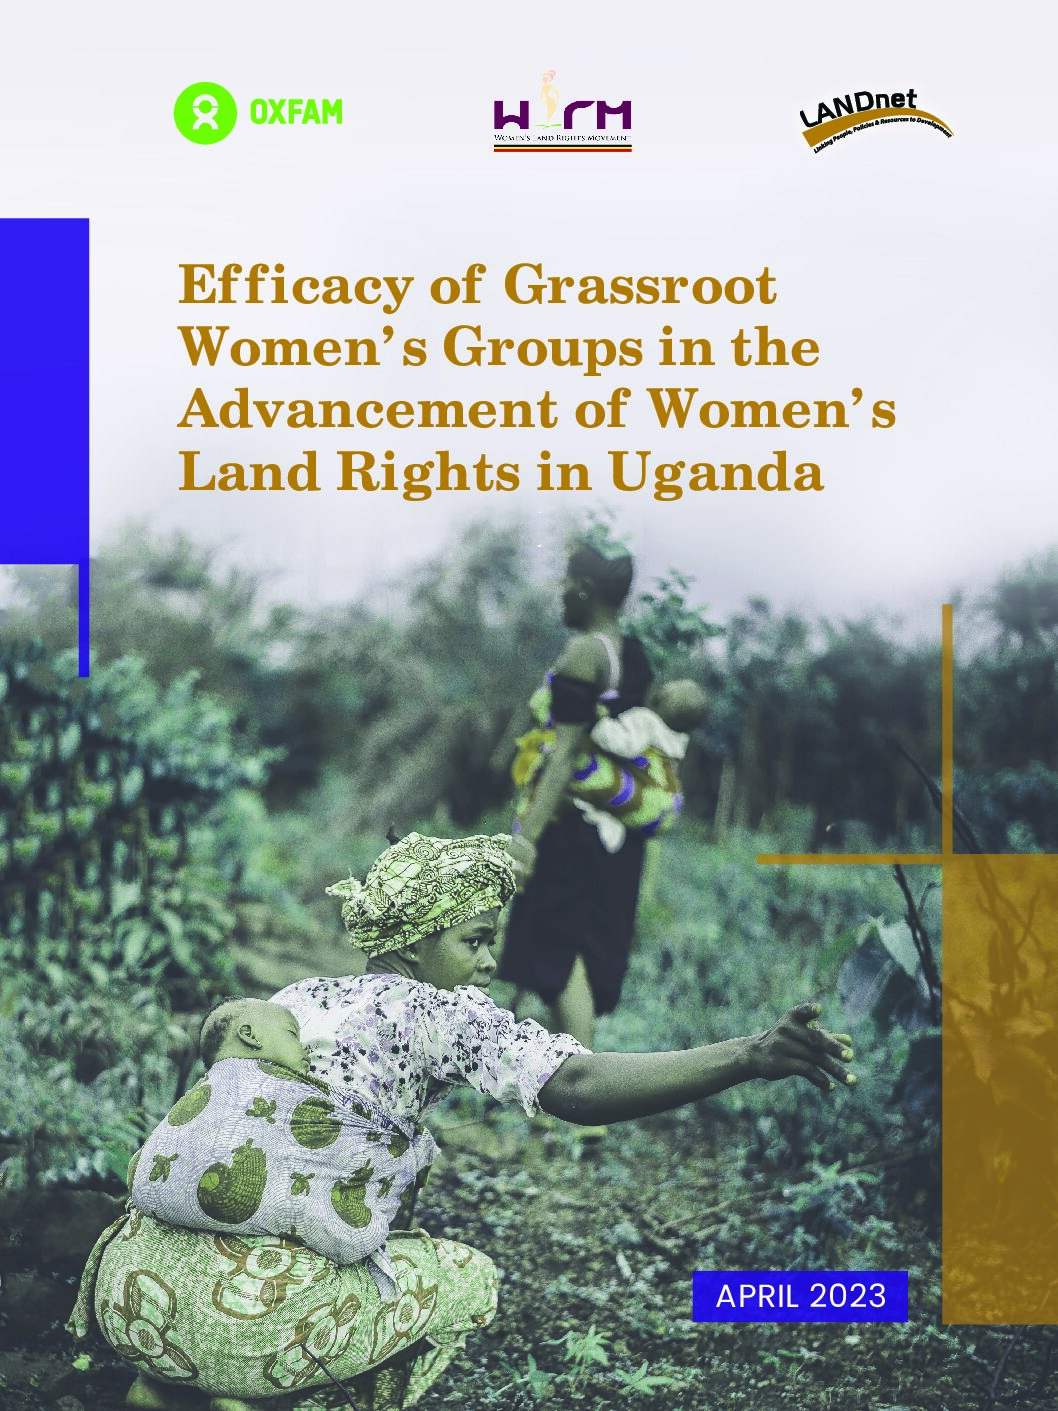 Efficacy of Grassroot Women’s Groups in the Advancement of Women’s Land Rights in Uganda